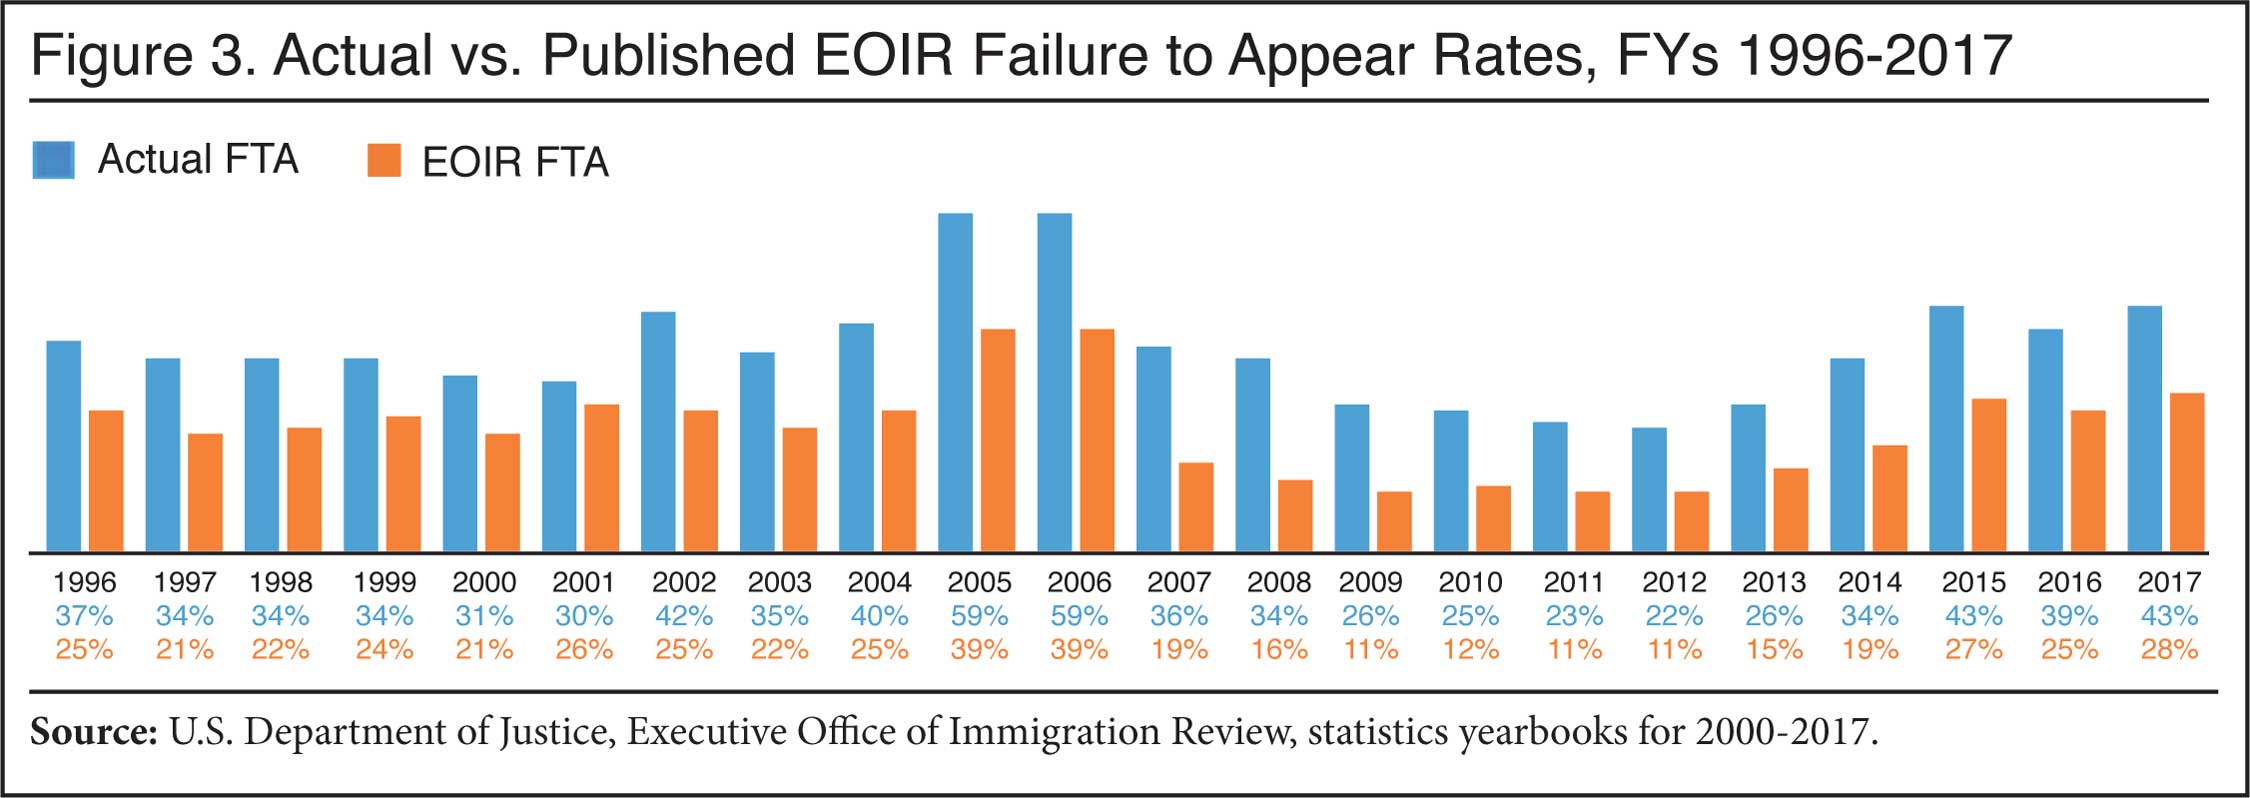 Graph: Actual vs. Published EOIR Failure to Appear Rates, FY 1996 to 2017